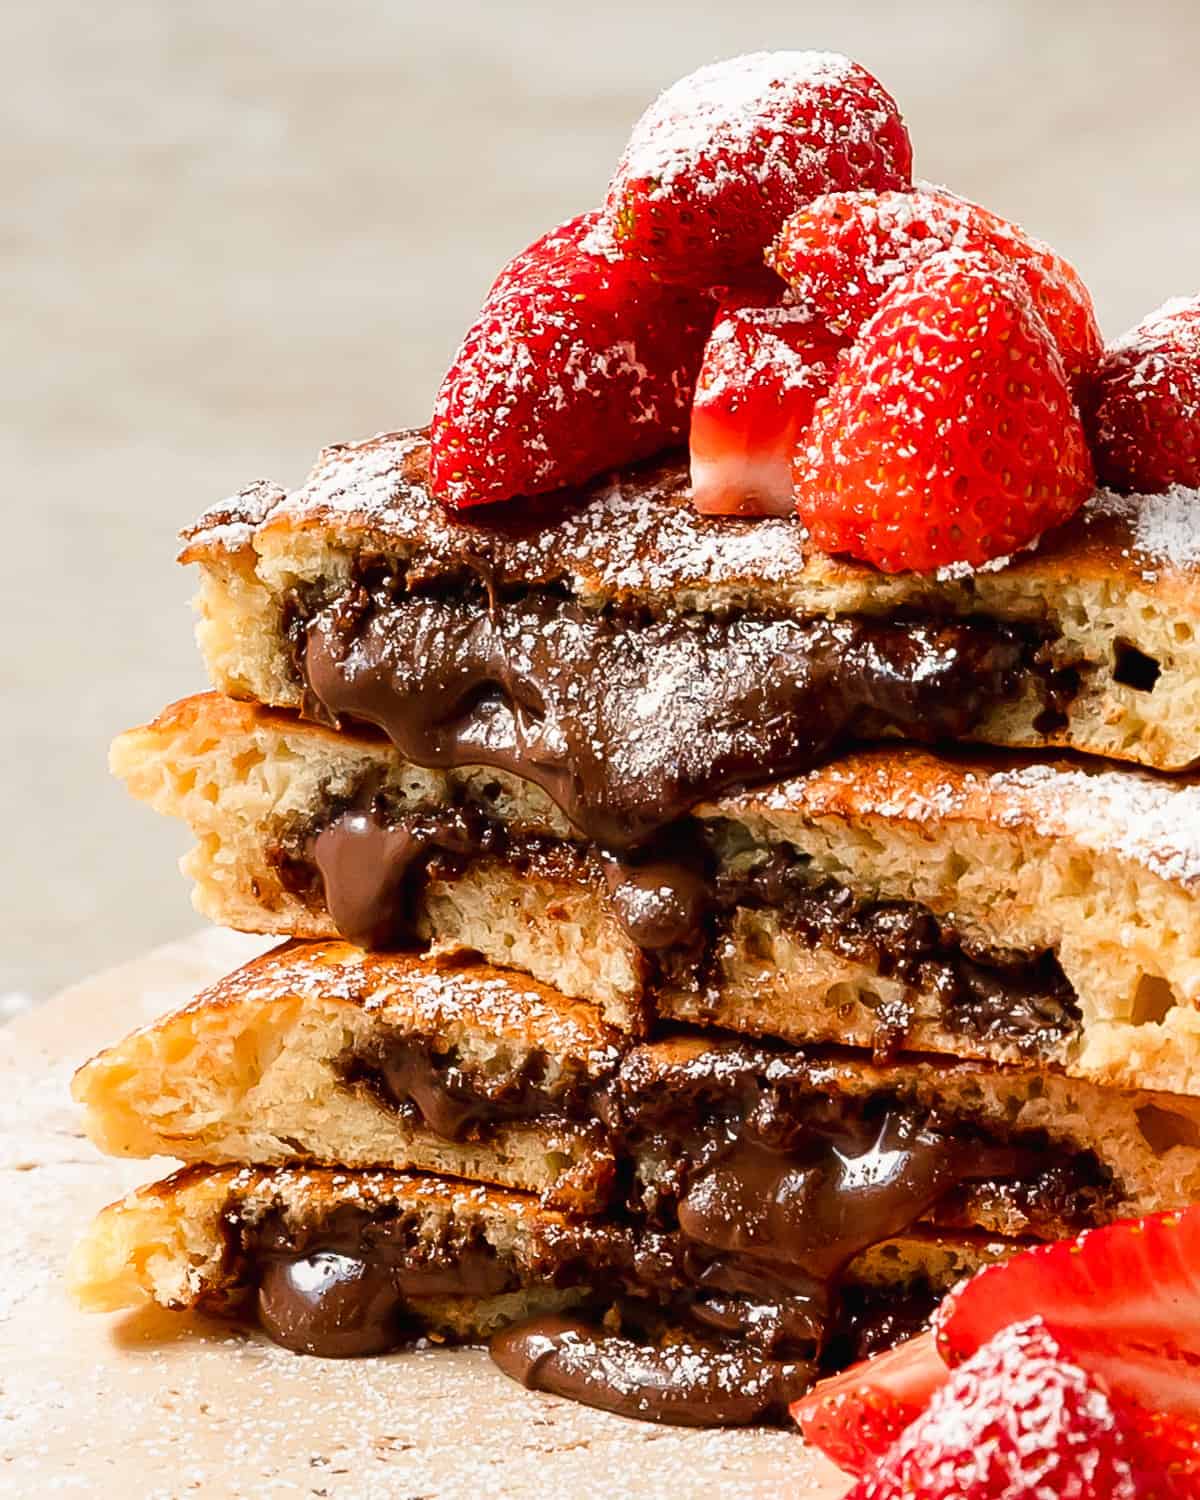 Nutella pancakes are light, fluffy and flavorful pancakes stuffed with creamy Nutella. Learn how to make these decadent and incredibly delicious Nutella stuffed pancakes in a few easy steps. A stack of these from homemade pancakes with Nutella makes the perfect special breakfast everyone will love. 